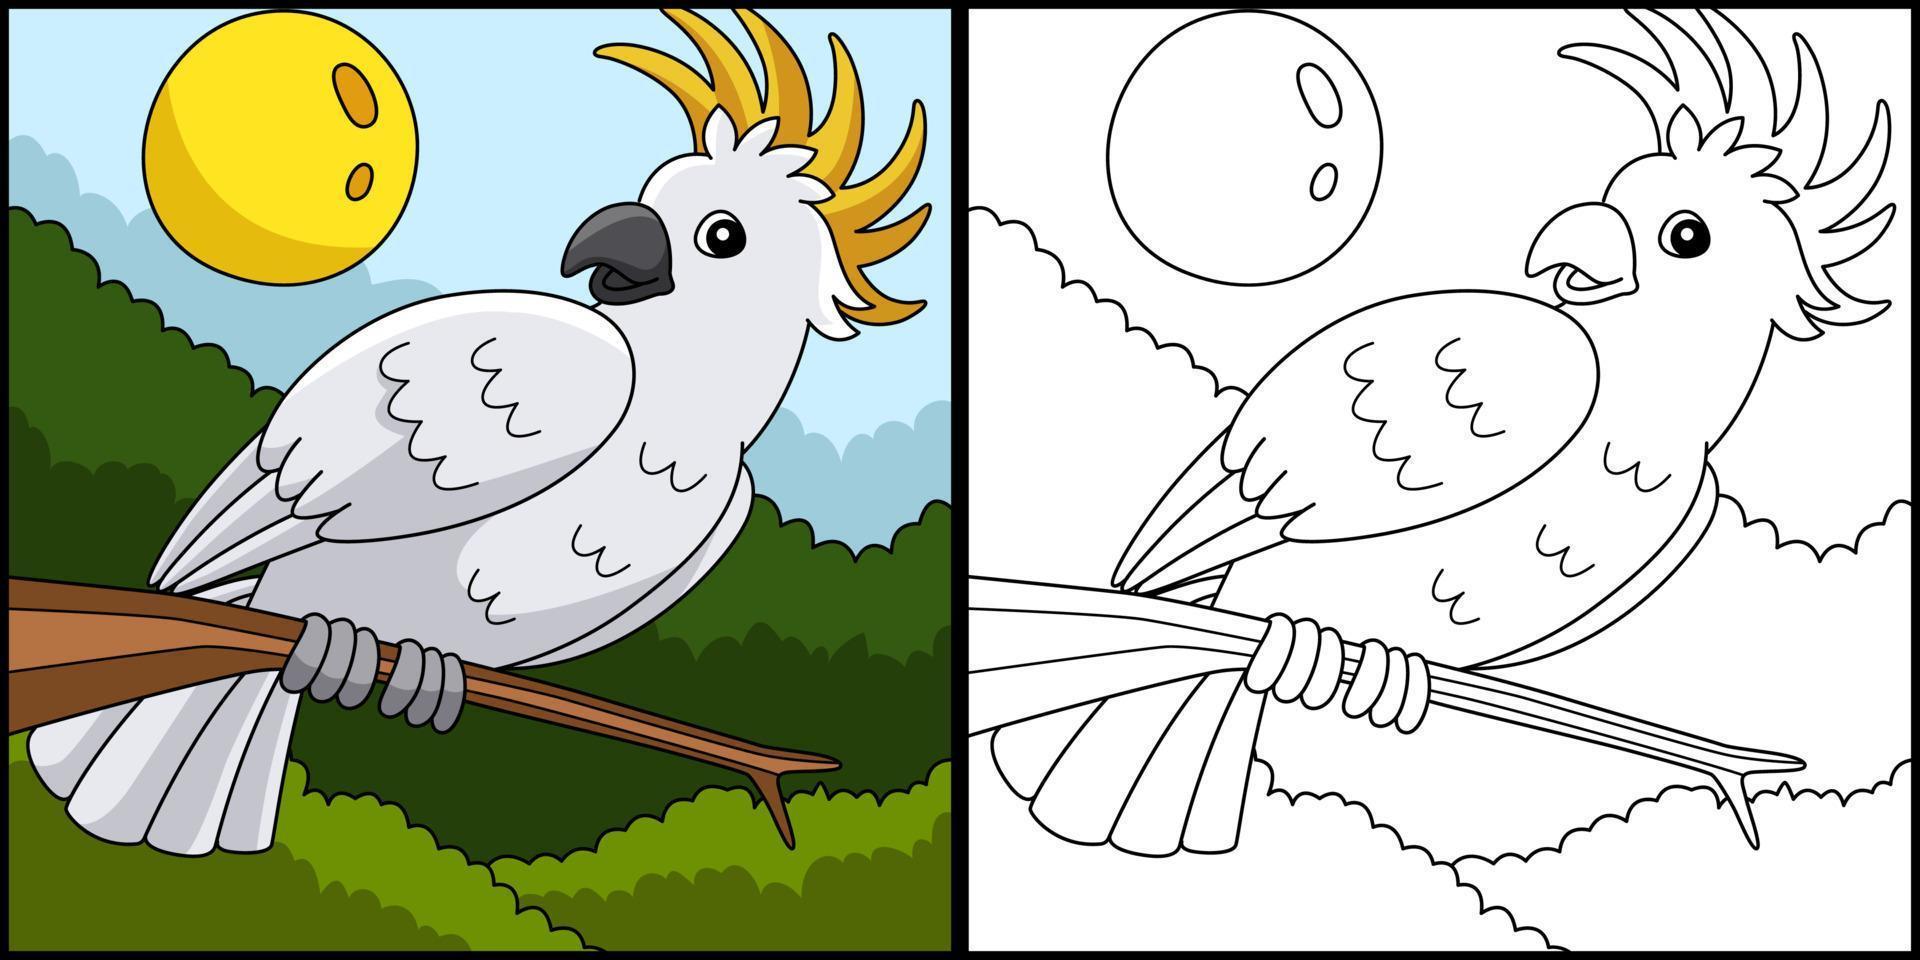 Cockatoo Animal Coloring Page Colored Illustration vector